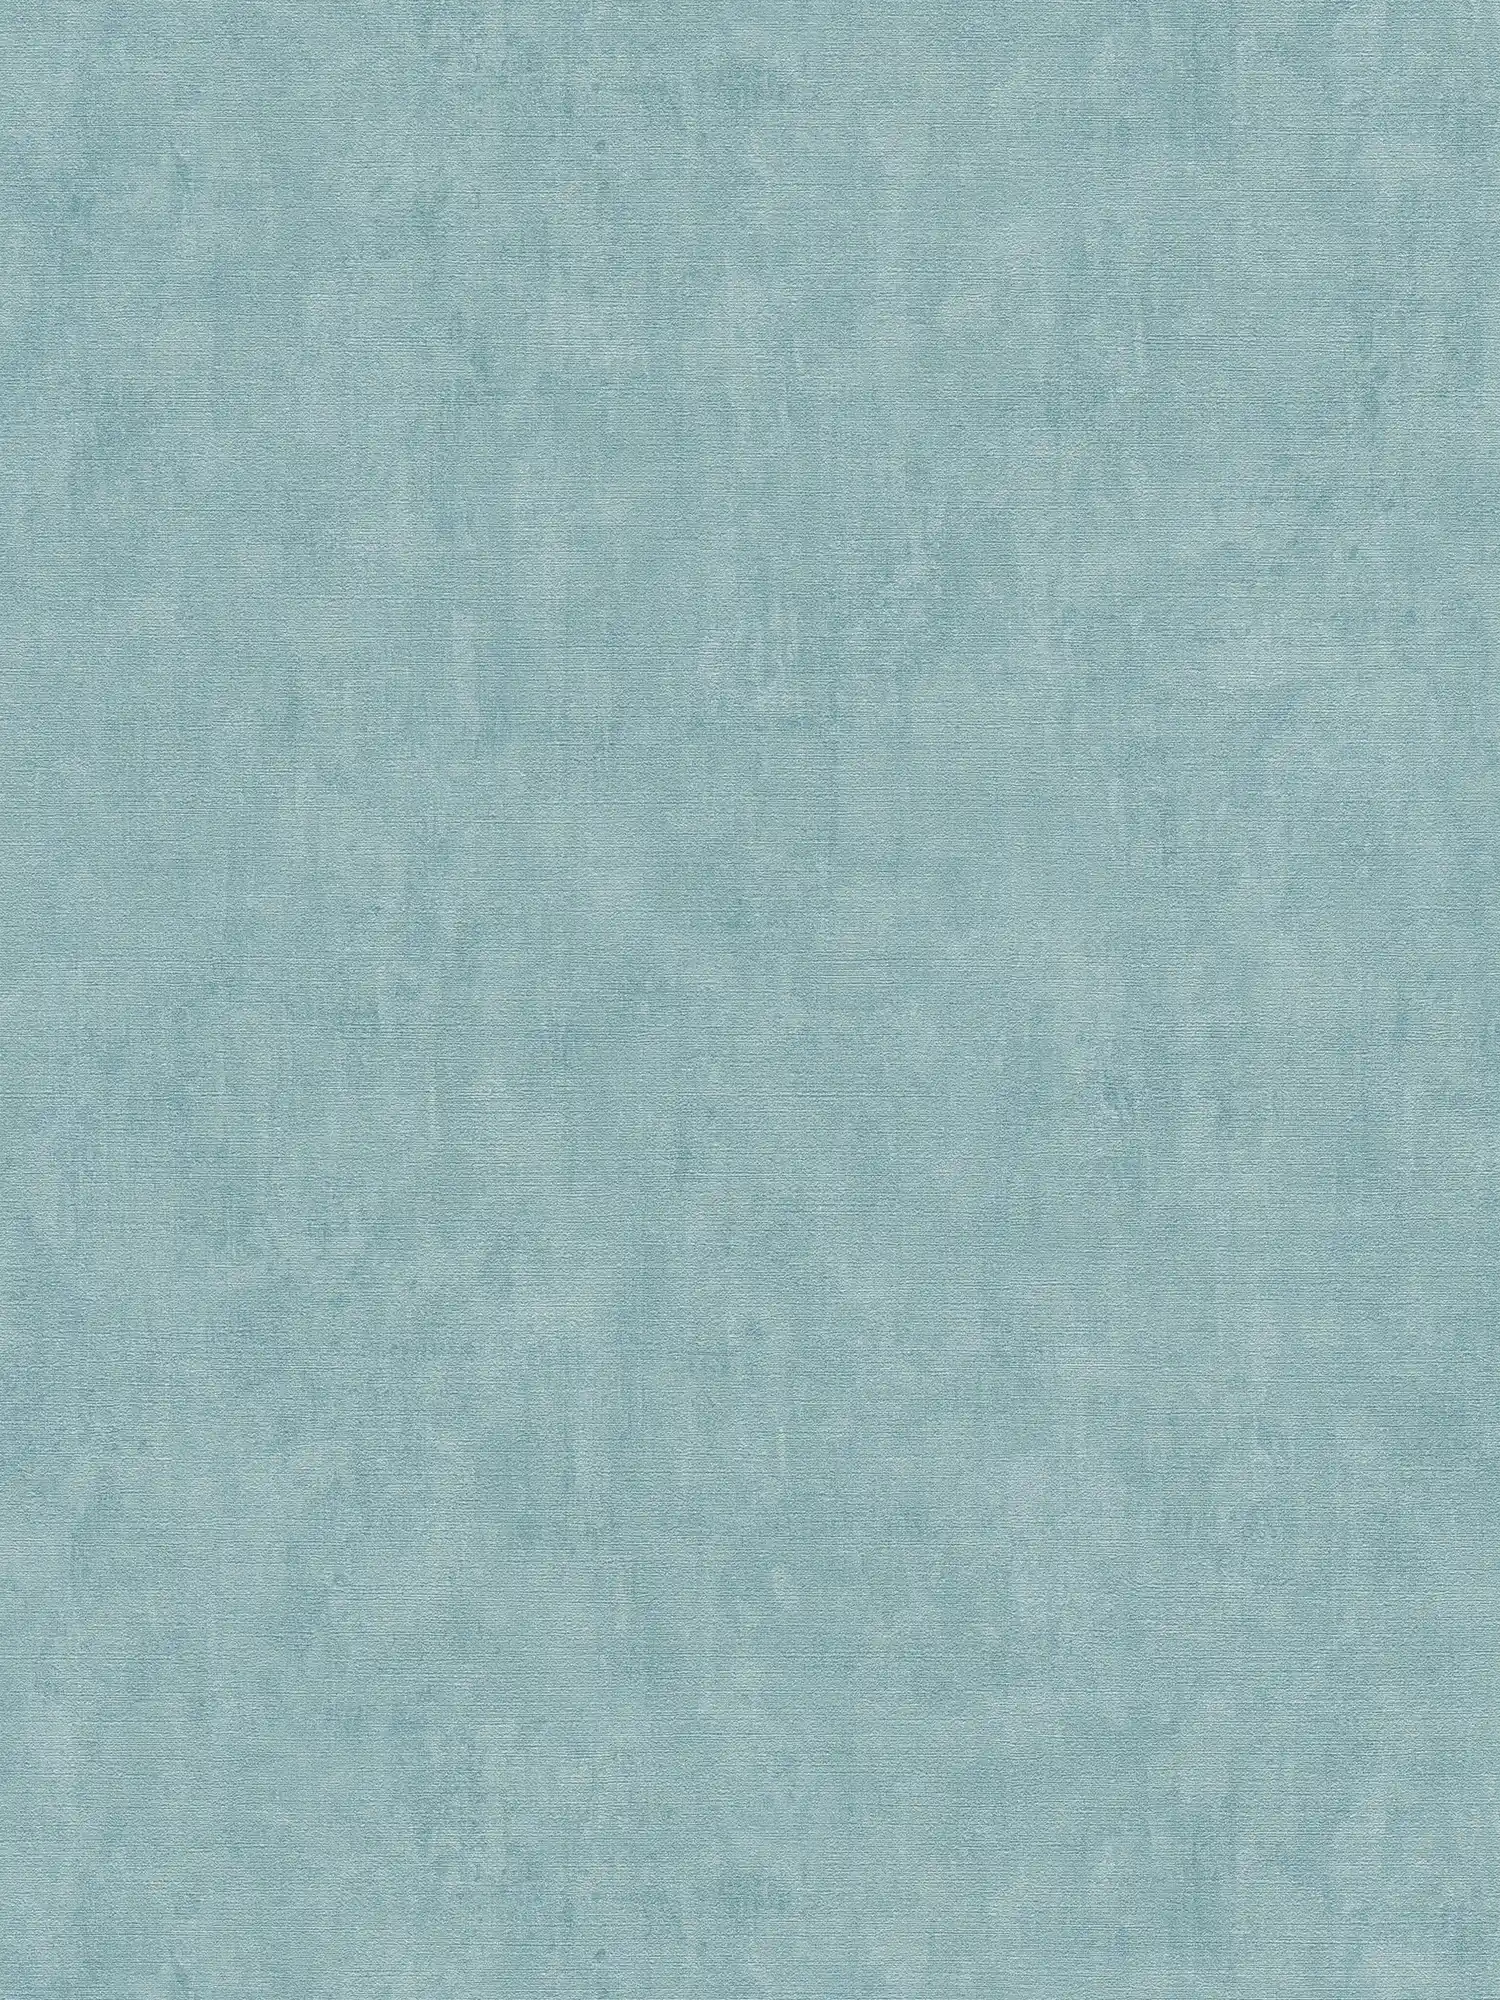 Wallpaper light blue colour hatching in vintage look - blue
